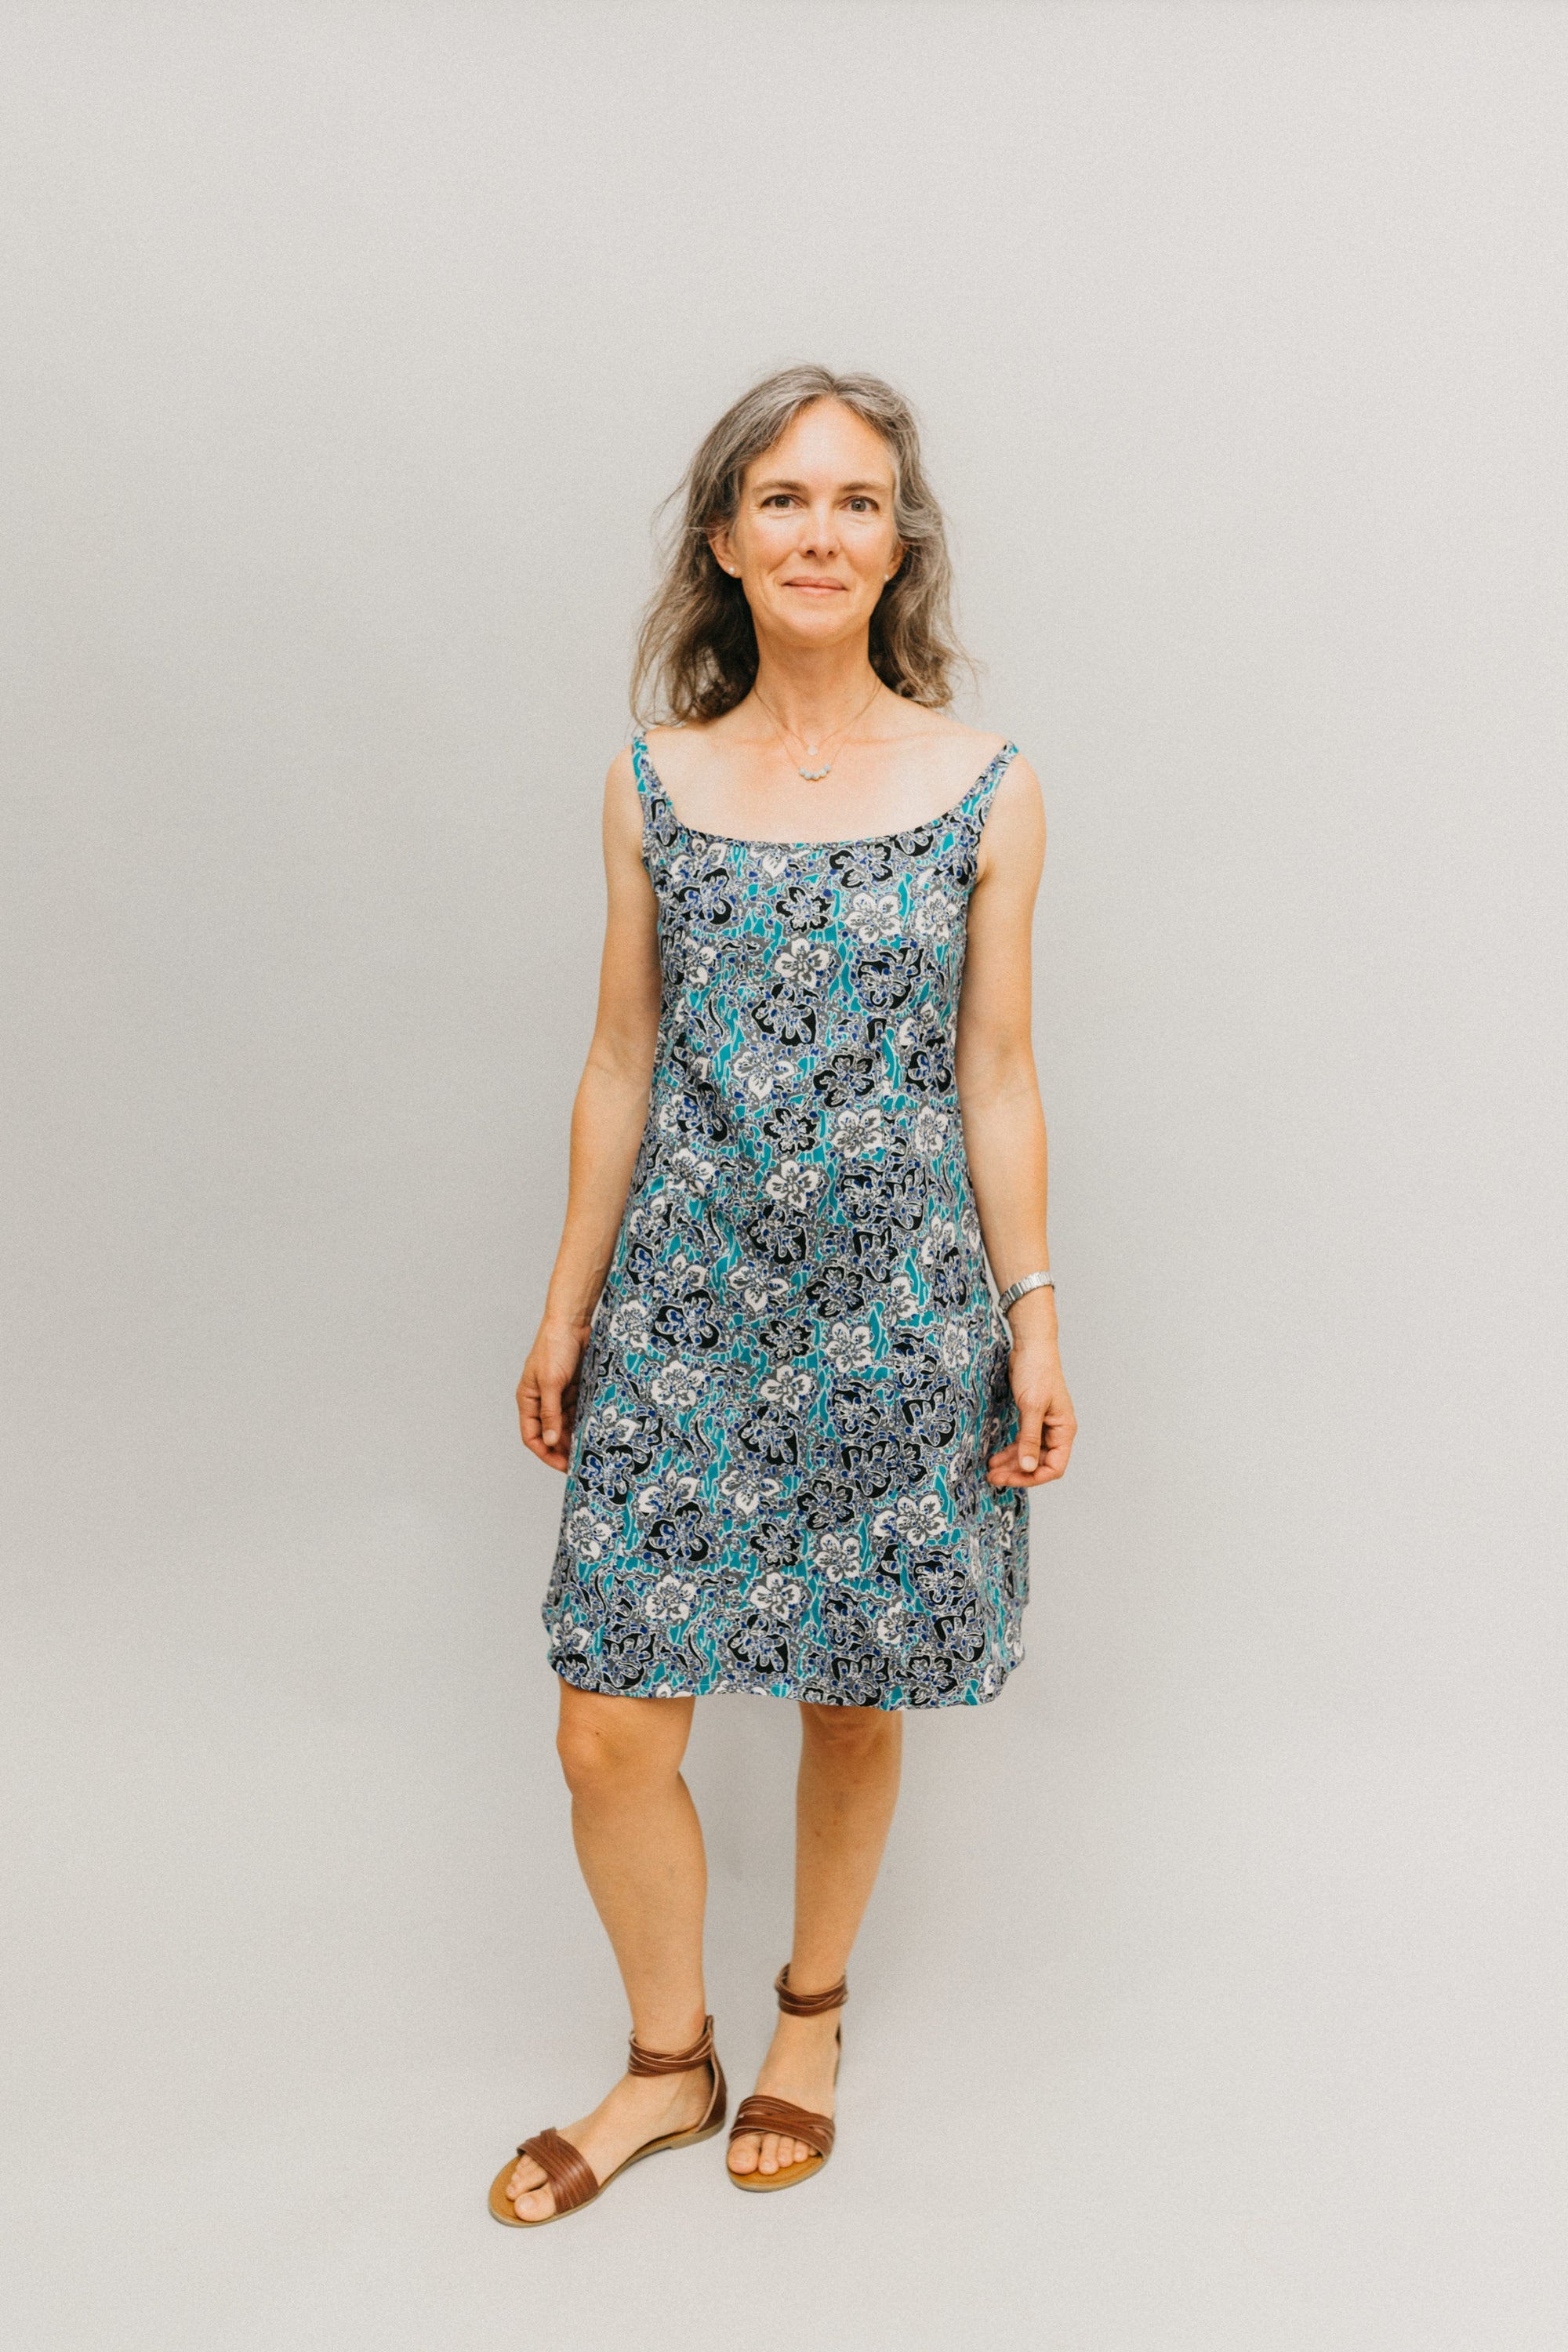 Woman wearing a teal, white, and black floral knee-length dress with narrow straps.